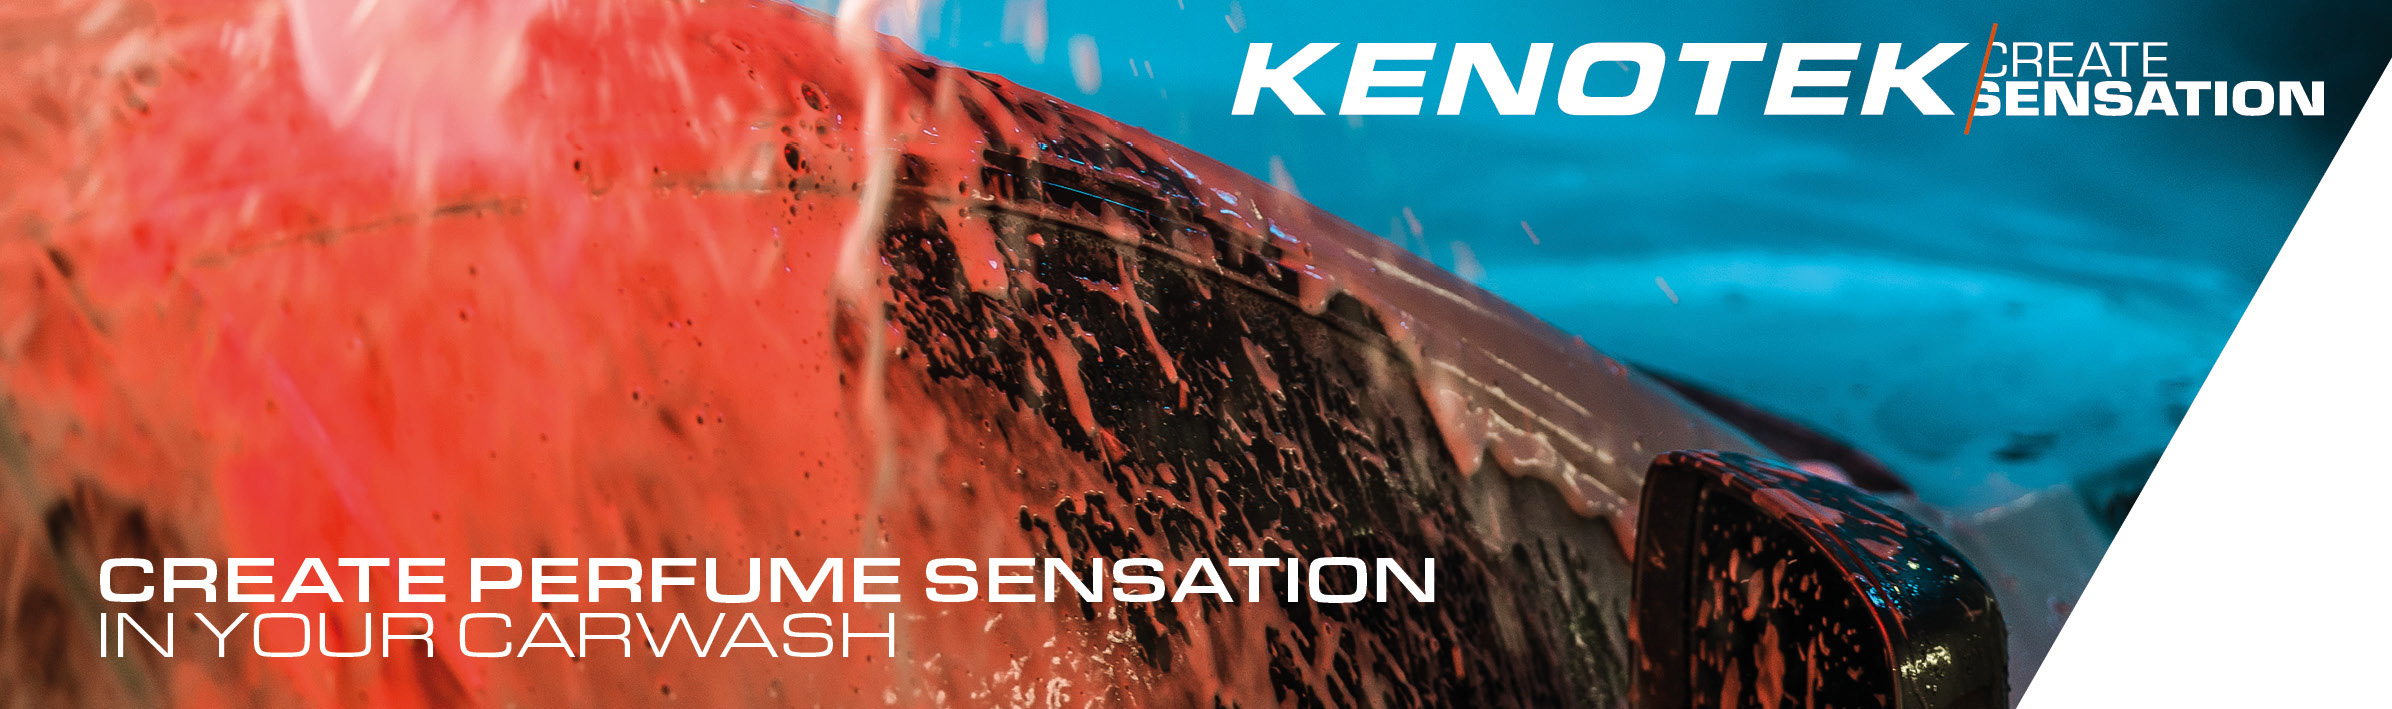 Products of the month Kenotek